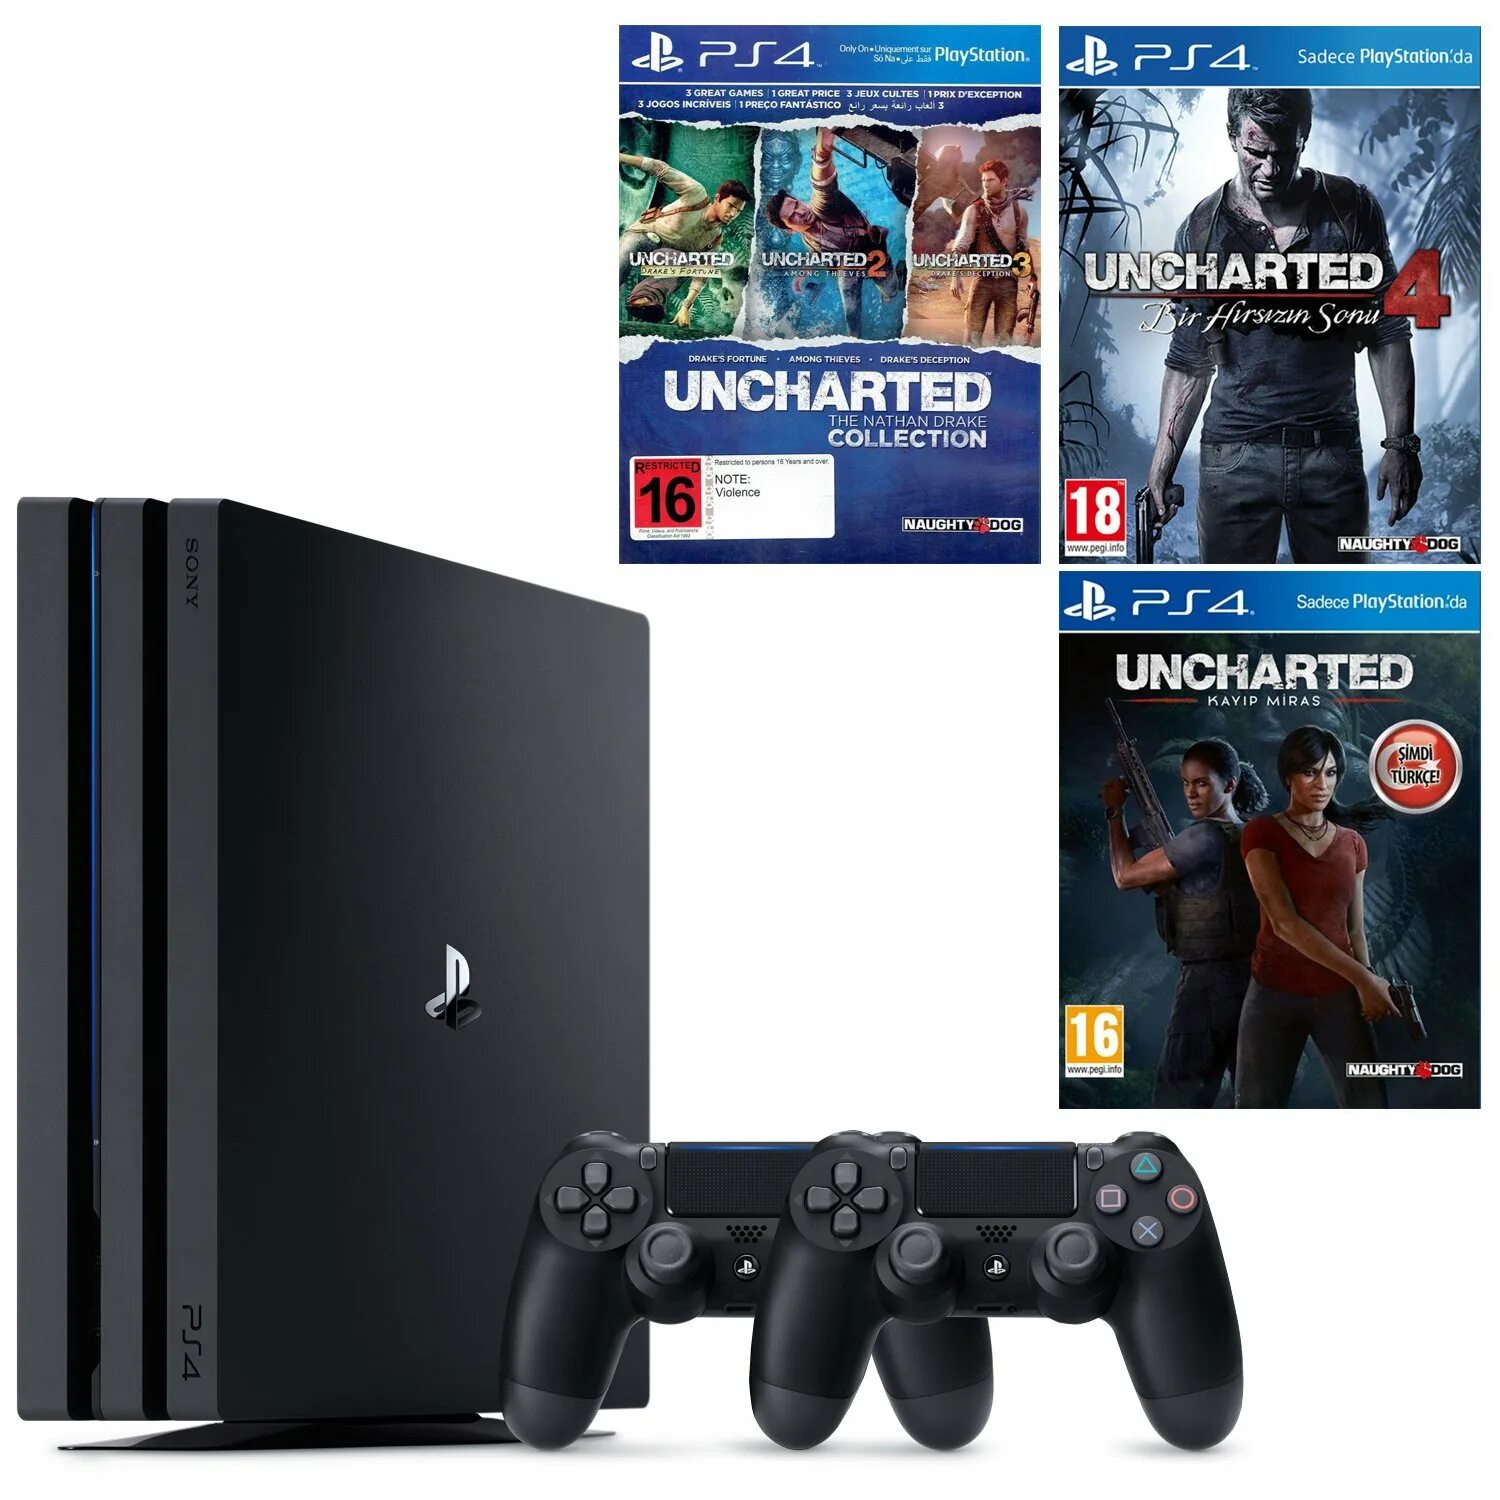 Uncharted ps4 купить. Игровая приставка Sony PLAYSTATION 4 Pro. Ps4 Pro 7016b. Uncharted 1 ps4. Ps4 Pro White 1tb.